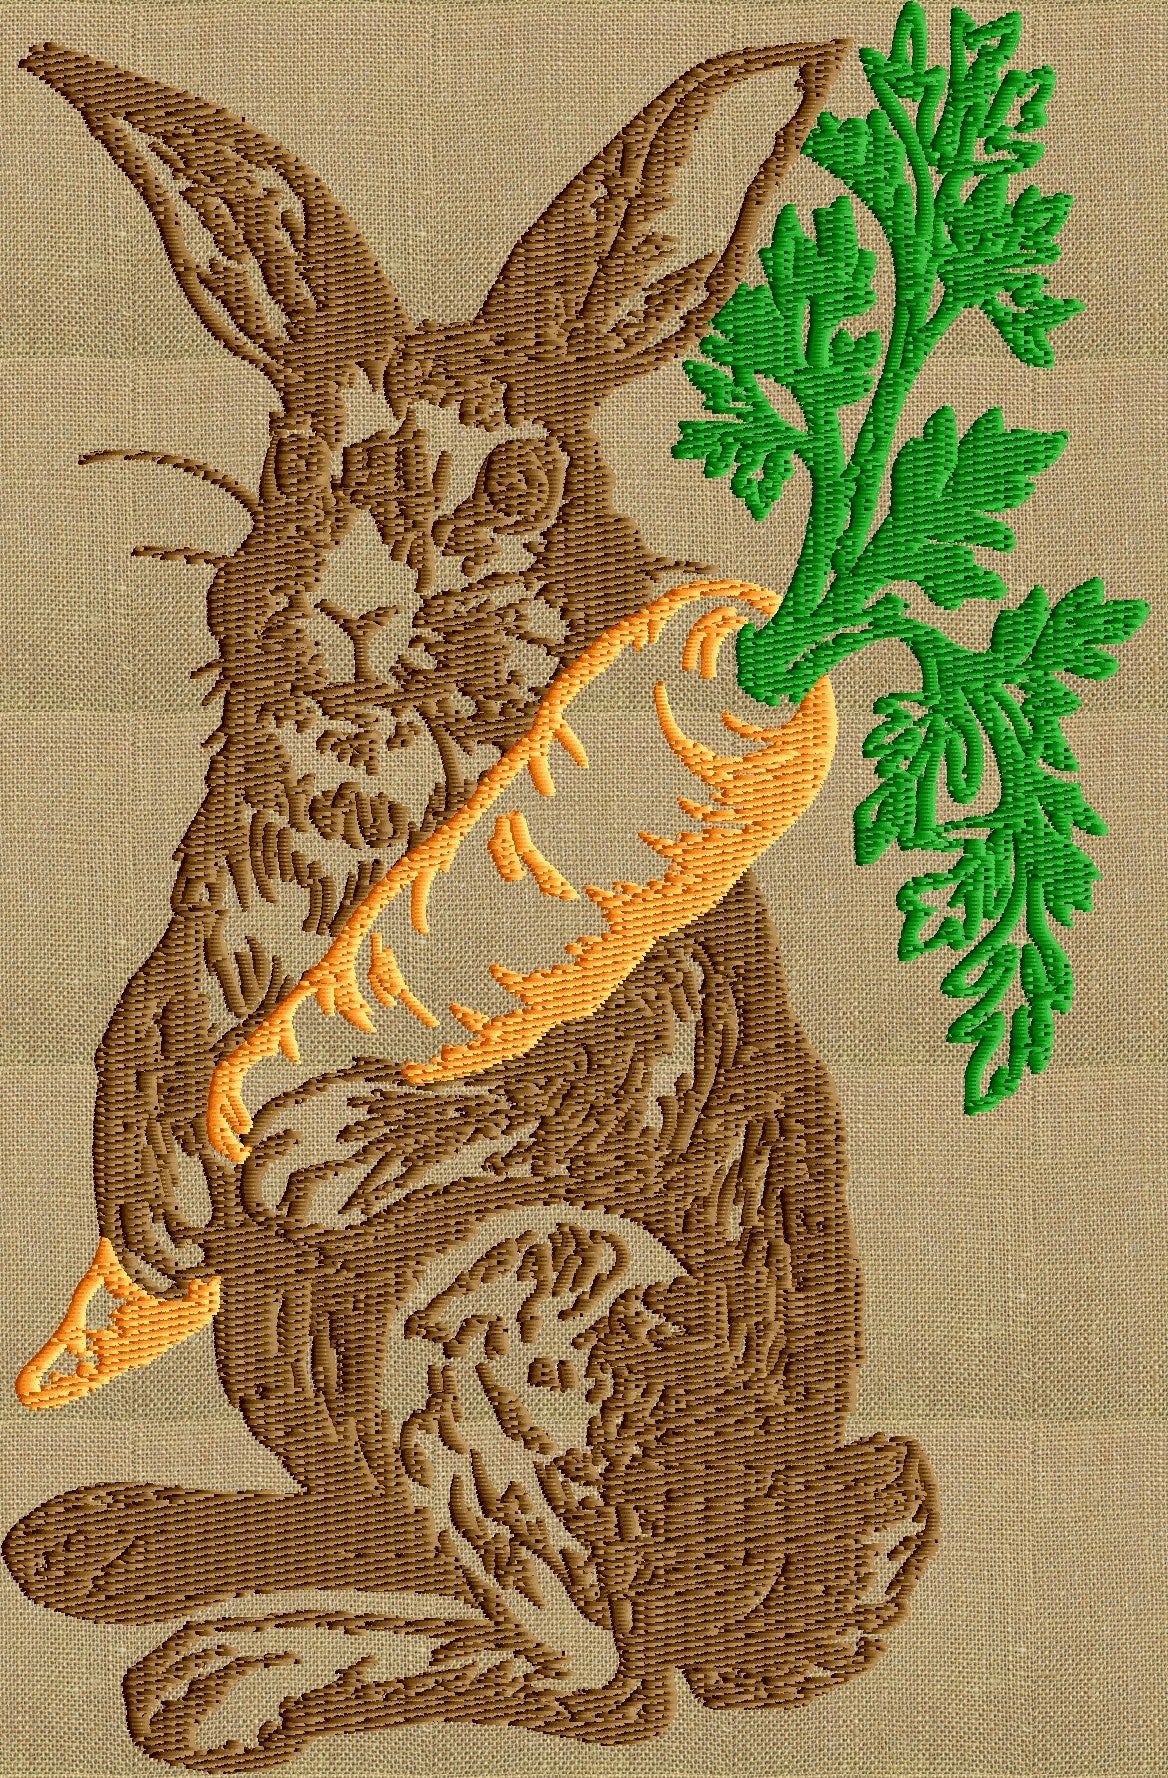 Bunny with Carrot - Easter - Embroidery Design Embroidery DESIGN FILE Instant download 2 sizes and 3 colors - Hus Dst Jef Pes Exp Vp3